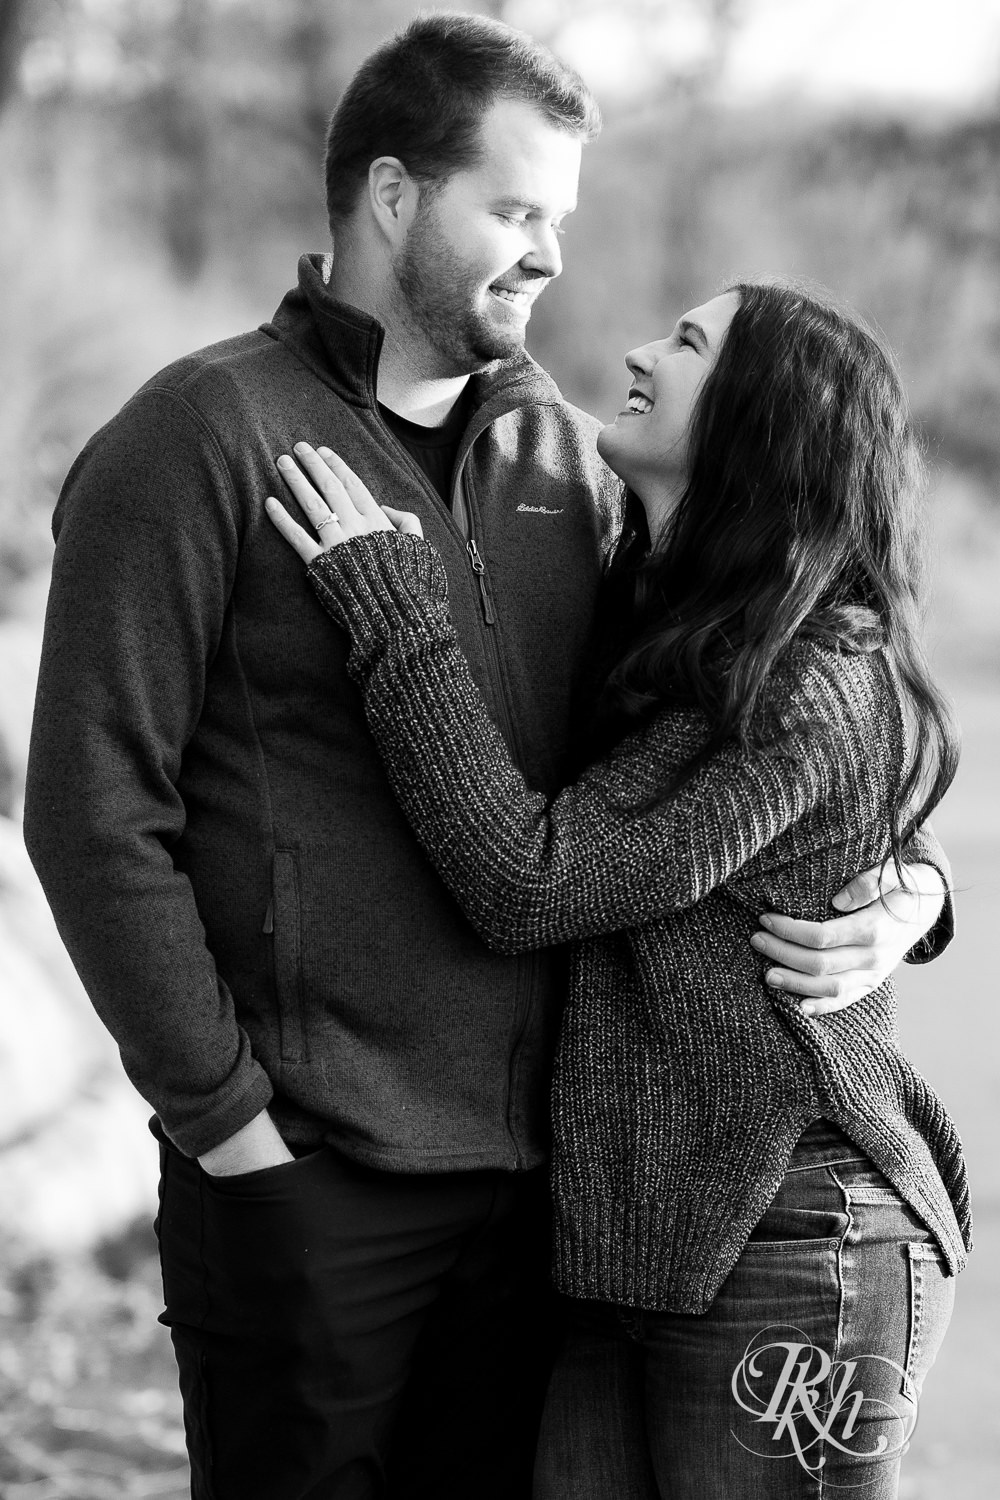 Man and woman smile and snuggle during winter engagement photography at Lebanon Hills in Eagan, Minnesota.